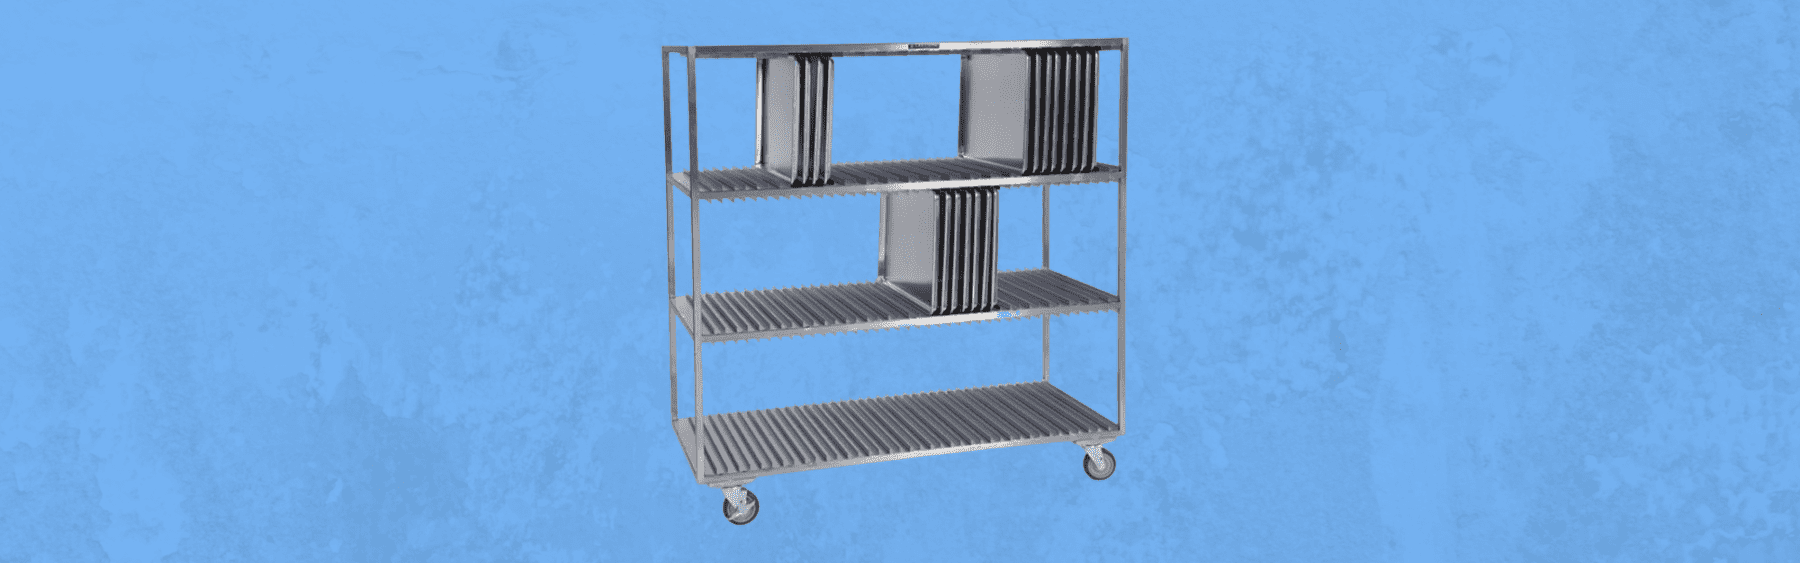 Rack Up Insights on our Top 3 Industrial Drying Racks - Lakeside Foodservice